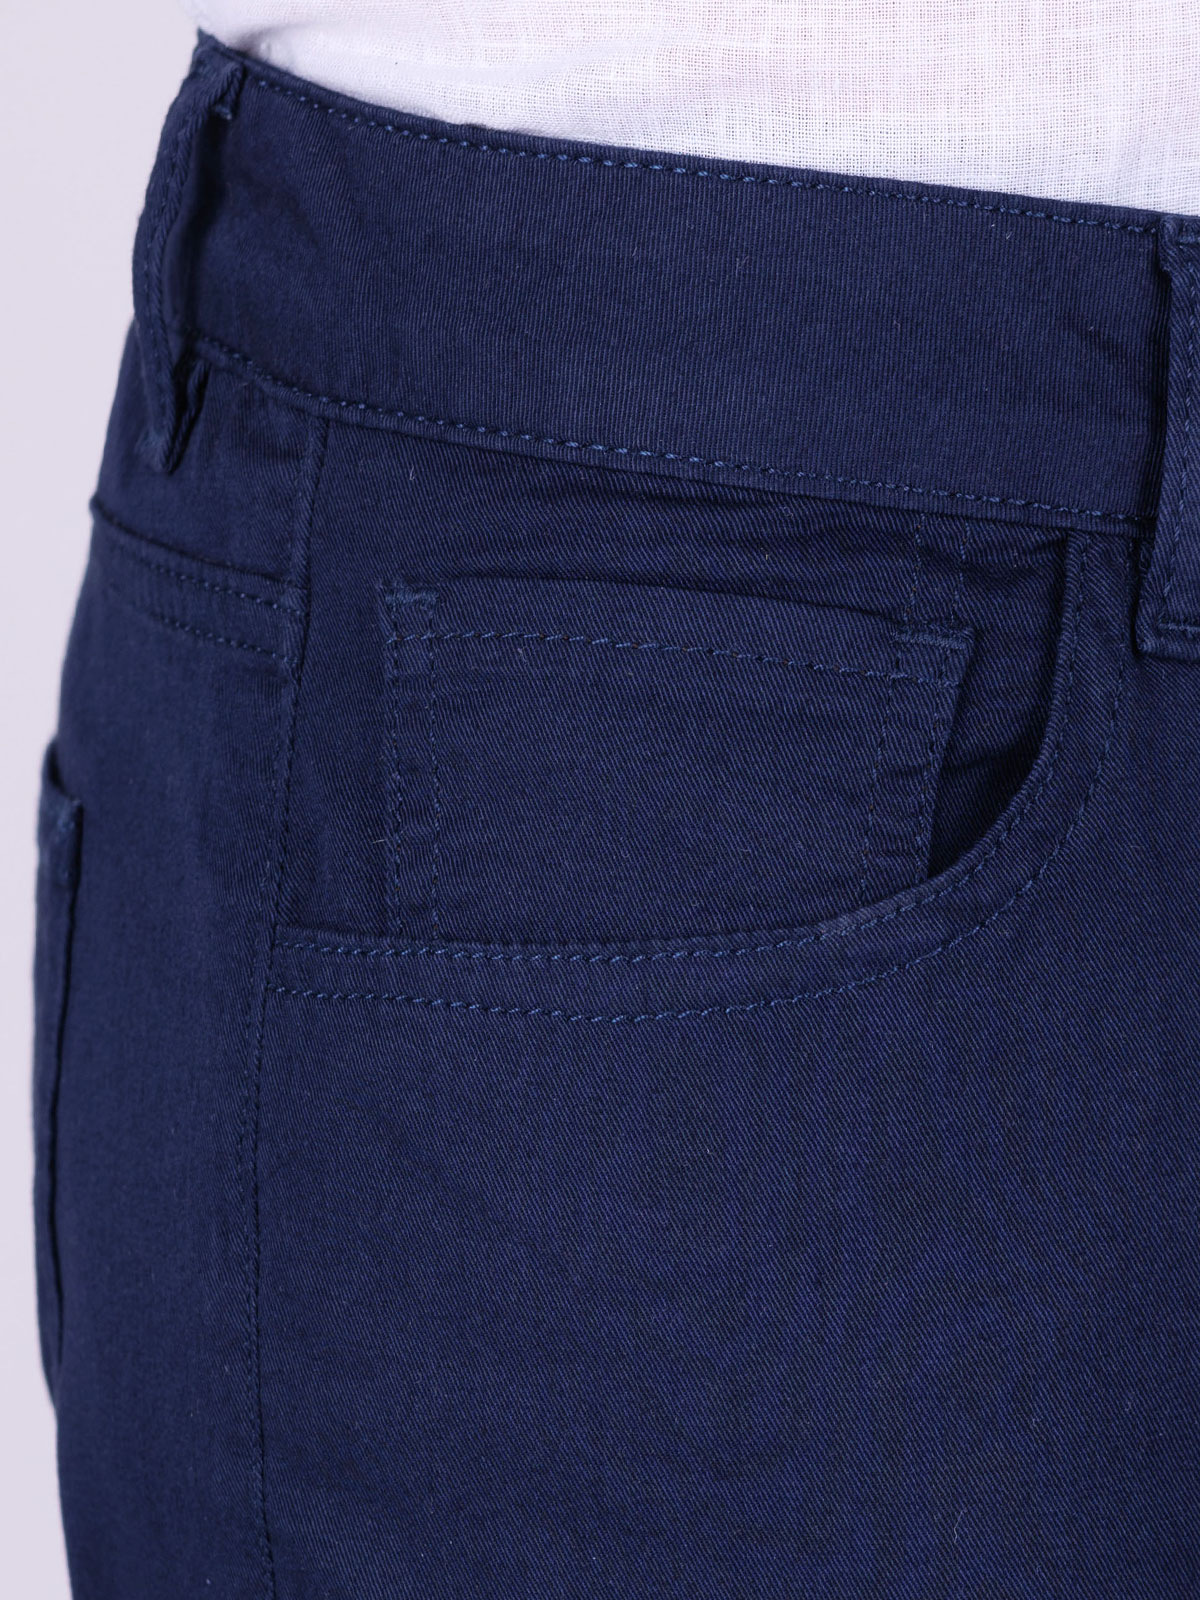 Navy five pocket trousers - 60301 € 66.37 img2